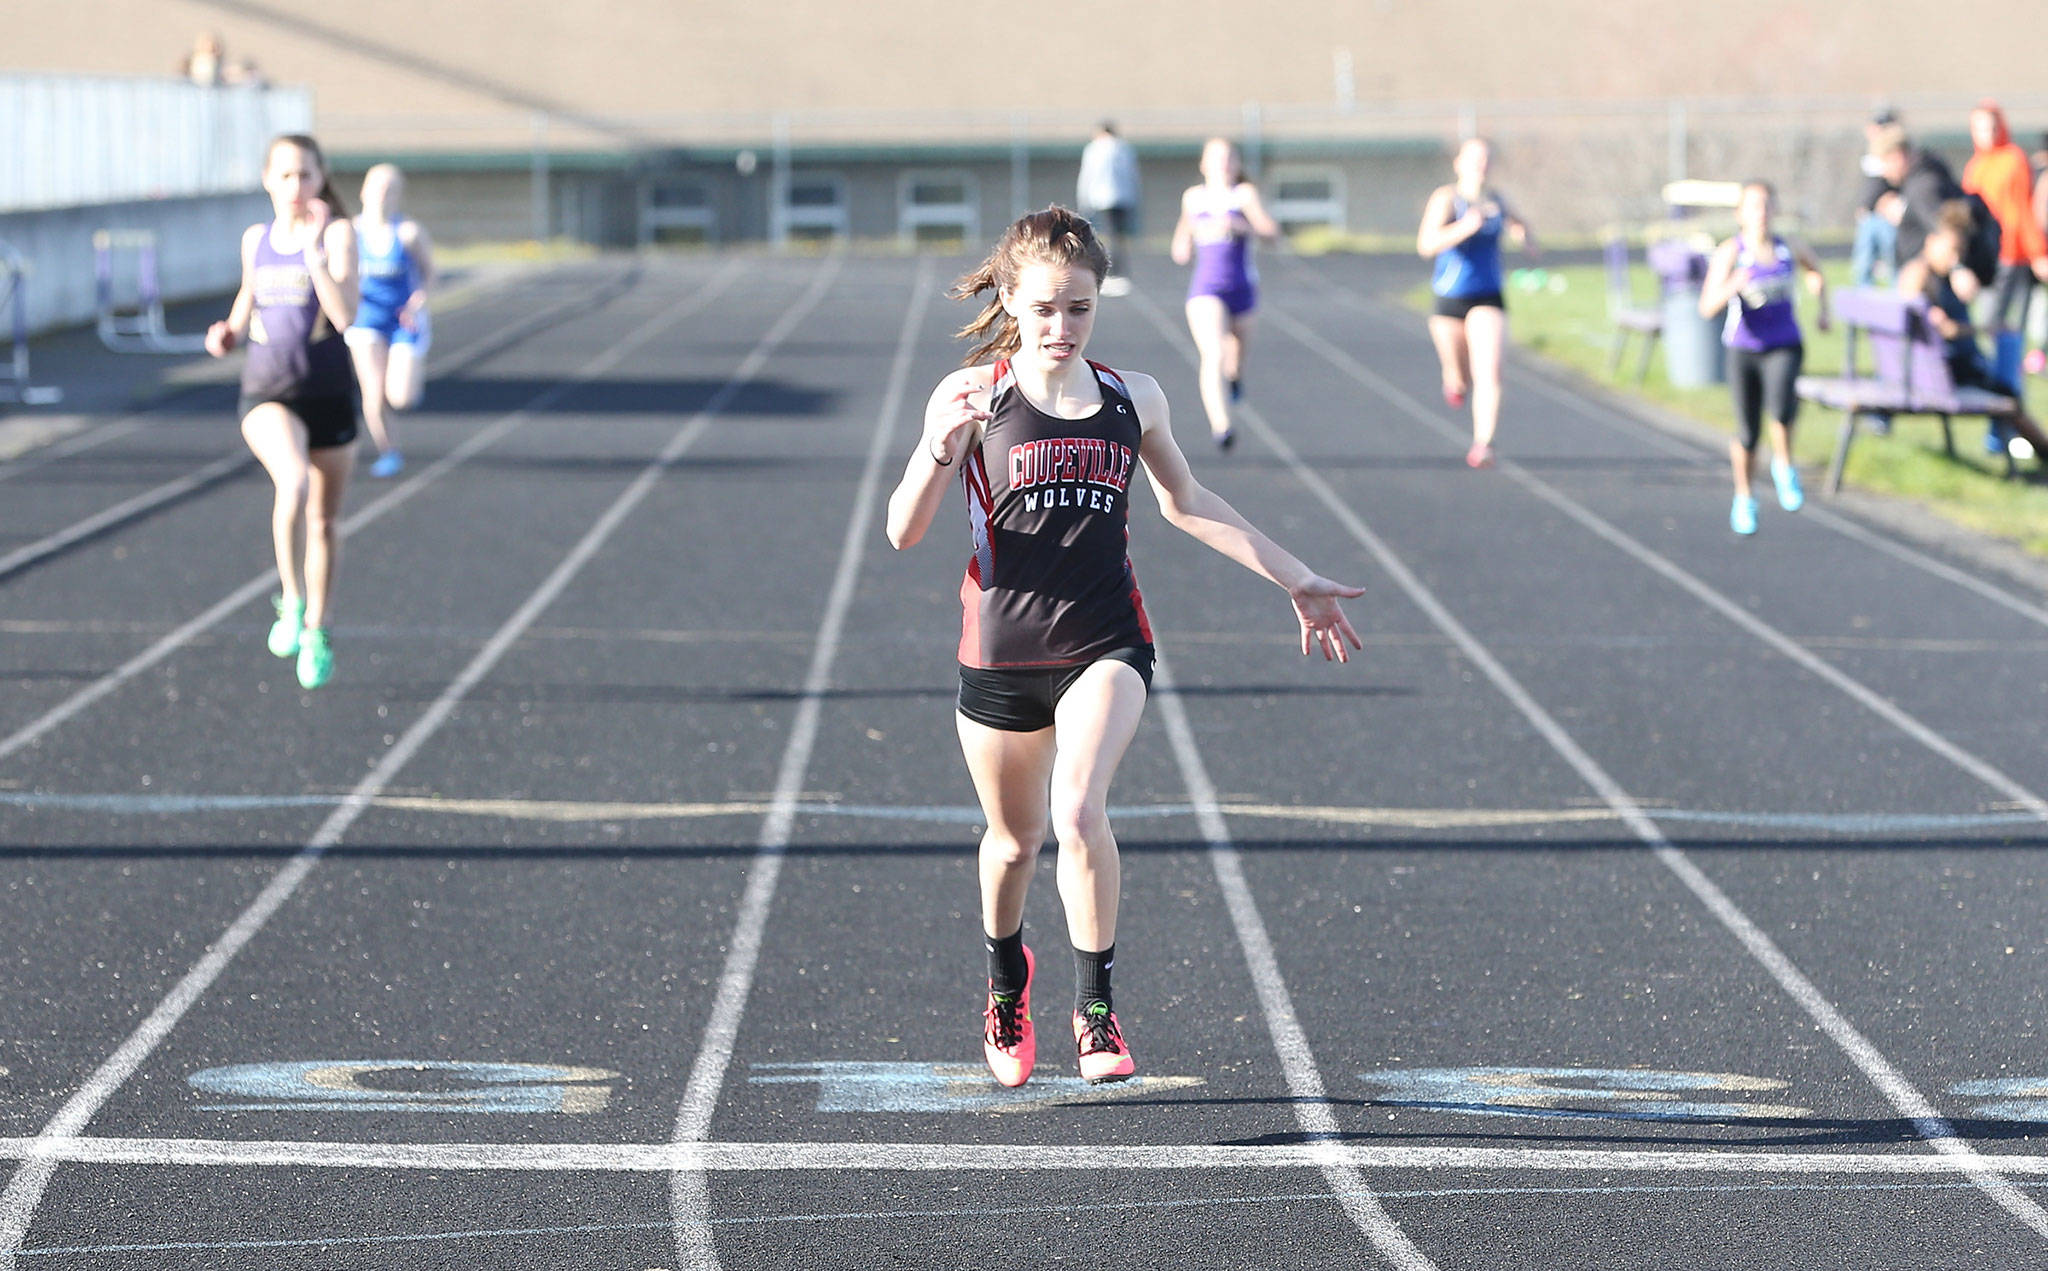 Coupeville’s Mallory Kortuem overwhelms the field in the 400 meters in Wednesday’s meet at Sequim.(Photo by John Fisken)